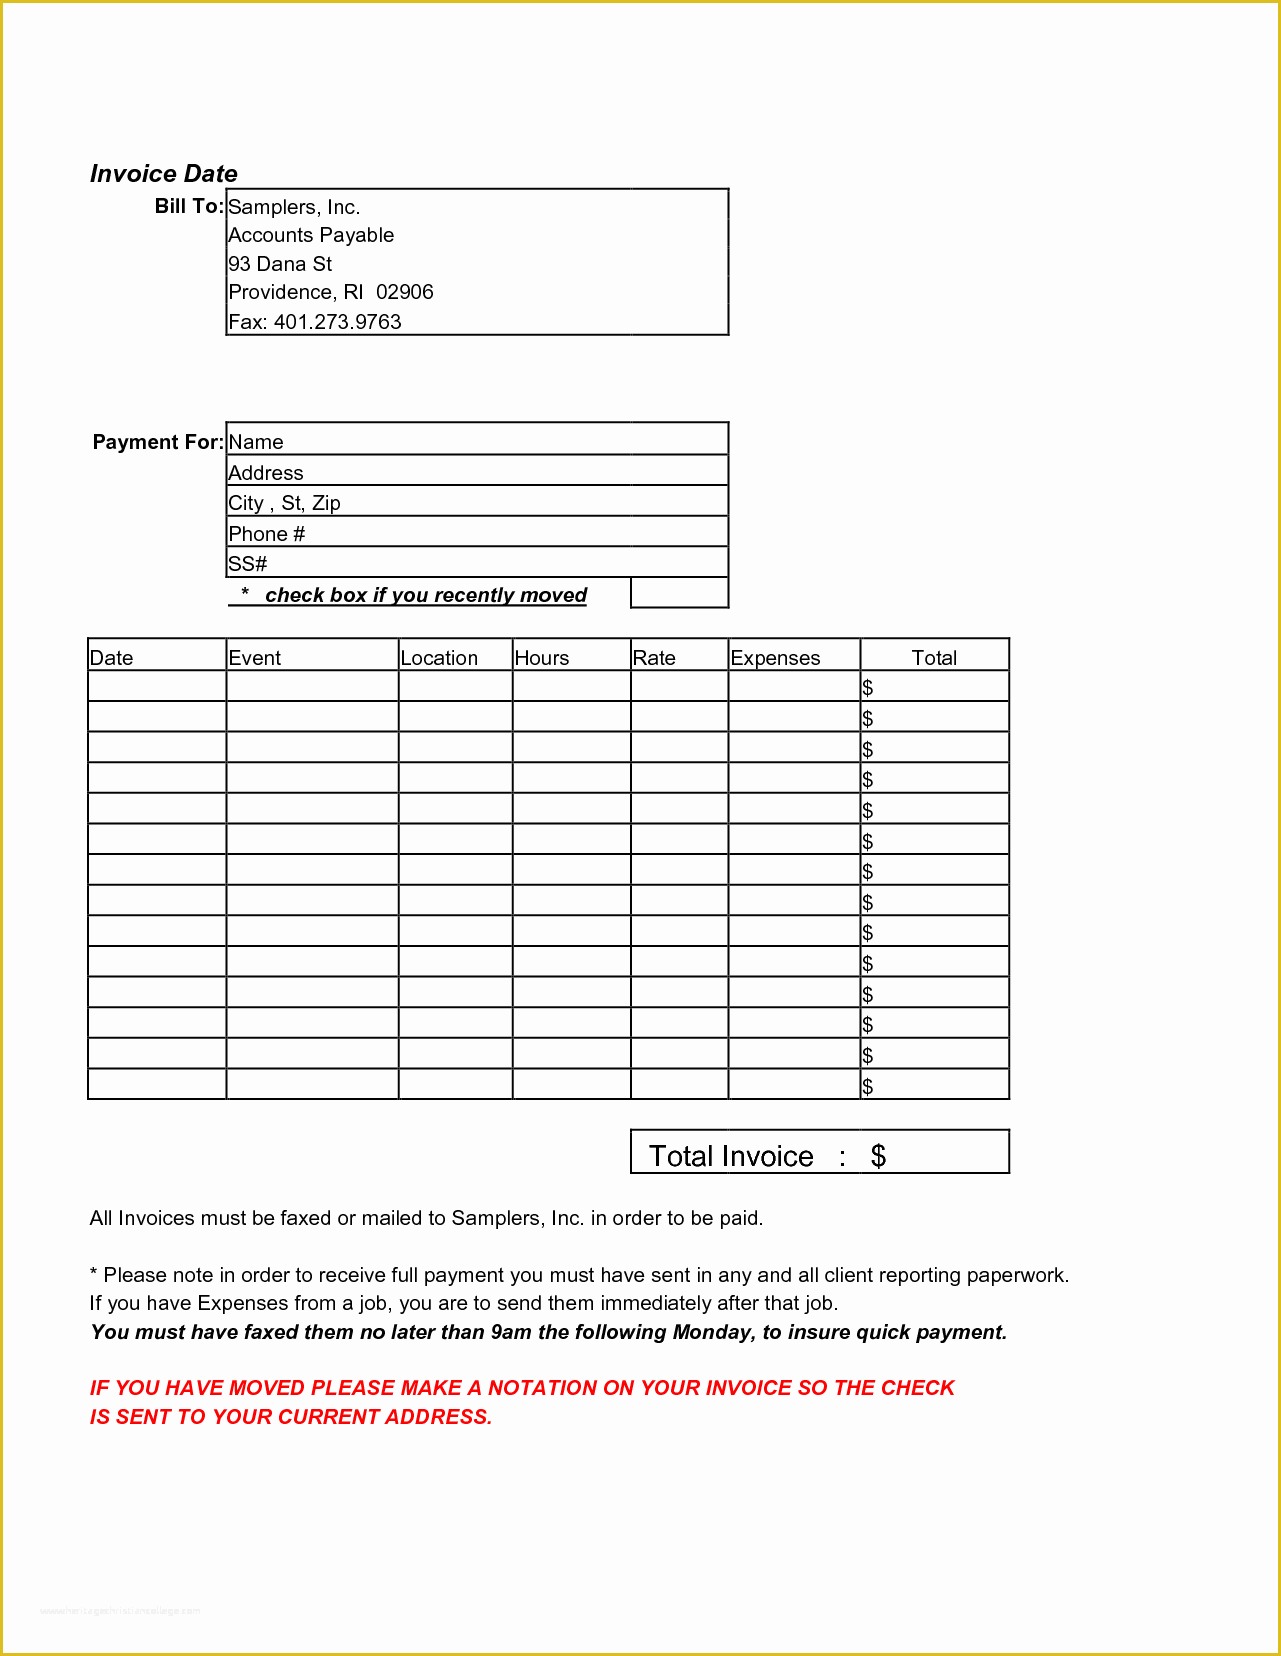 Free Contractor Invoice Template Of 10 Independent Contractor Invoice Template